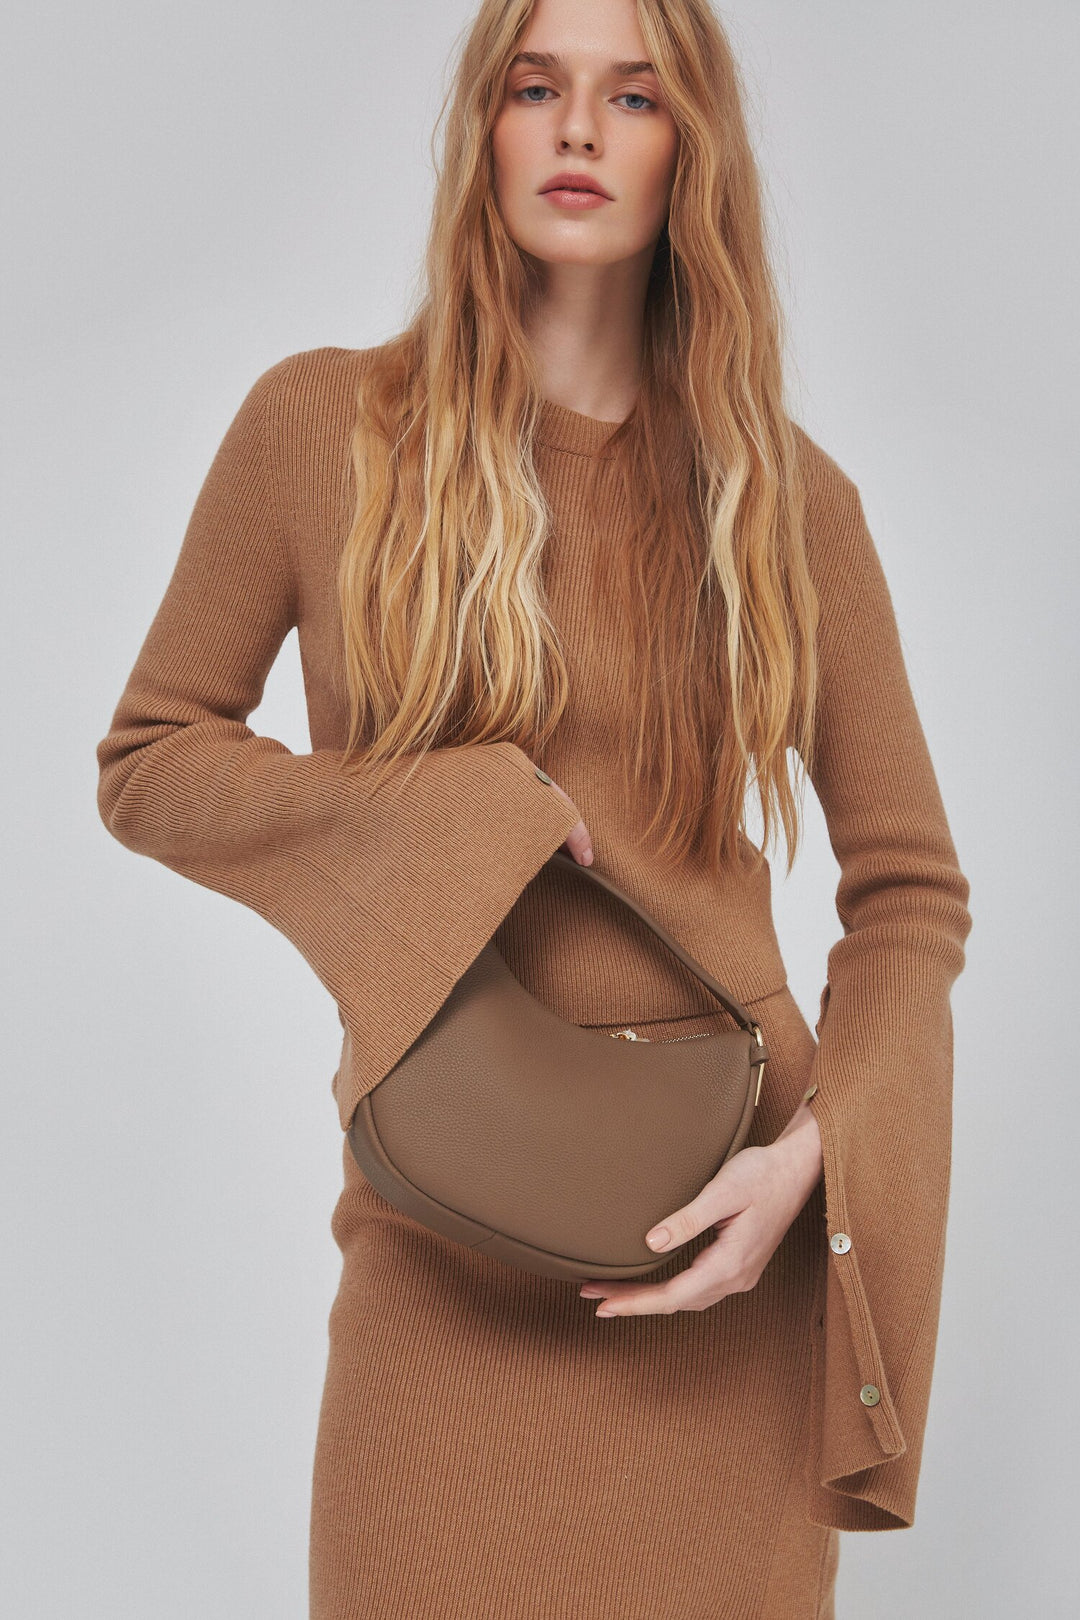 Brown crescent shaped handbag made of genuine leather by Estro - presentation on a model.